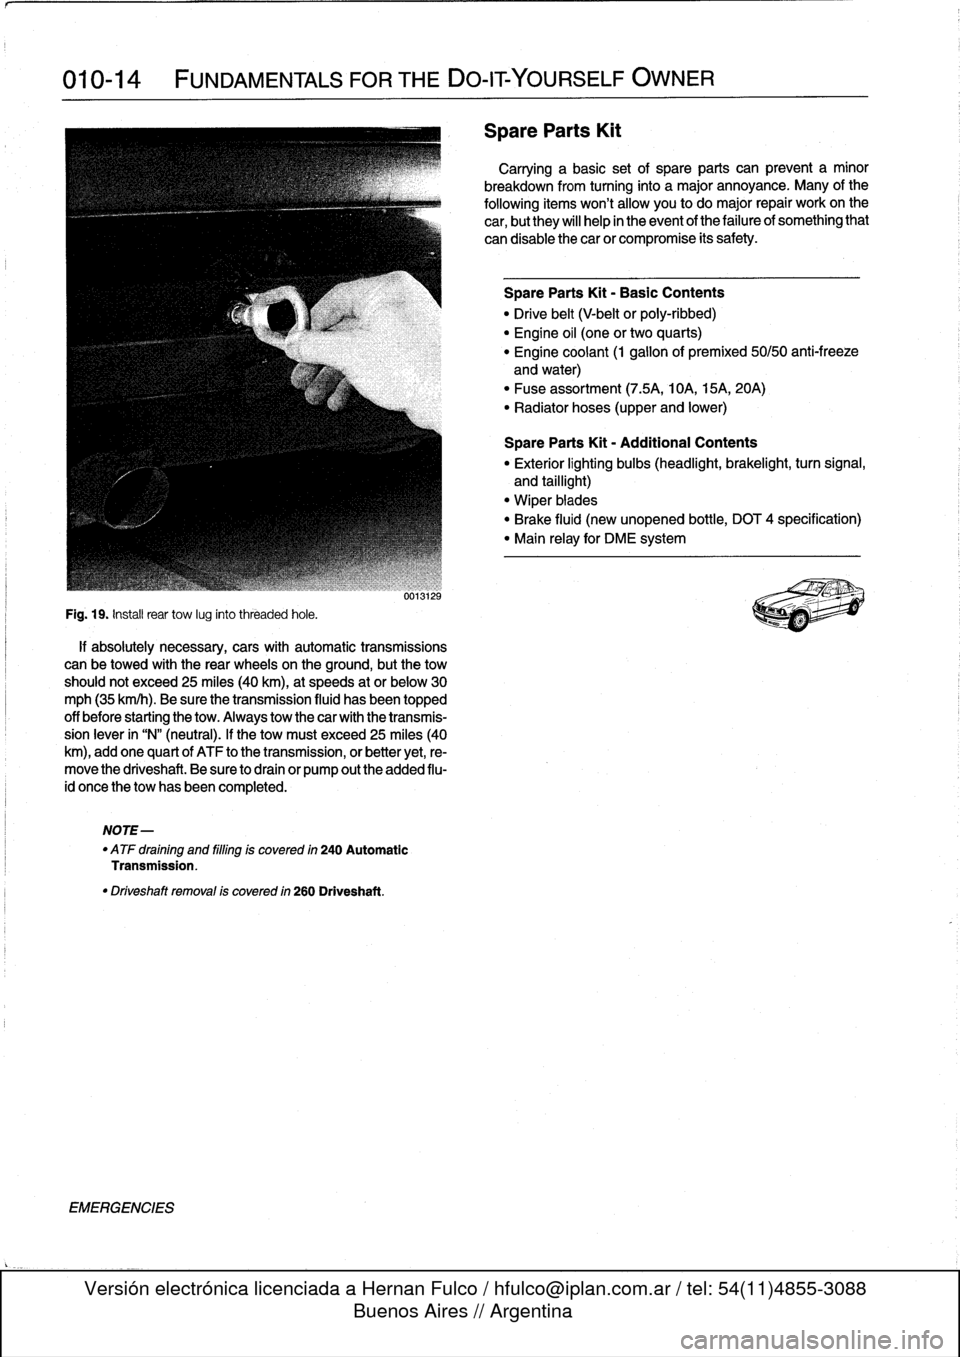 BMW 323i 1992 E36 Workshop Manual 
010-14

	

FUNDAMENTALS
FOR
THE
DO-ITYOURSELF
OWNER

Fig
.
19
.
Instaf
rear
tow
lug
into
threaded
hole
.

if
absolutely
necessary,
cars
with
automatic
transmissions
can
be
towed
with
the
rear
wheels
